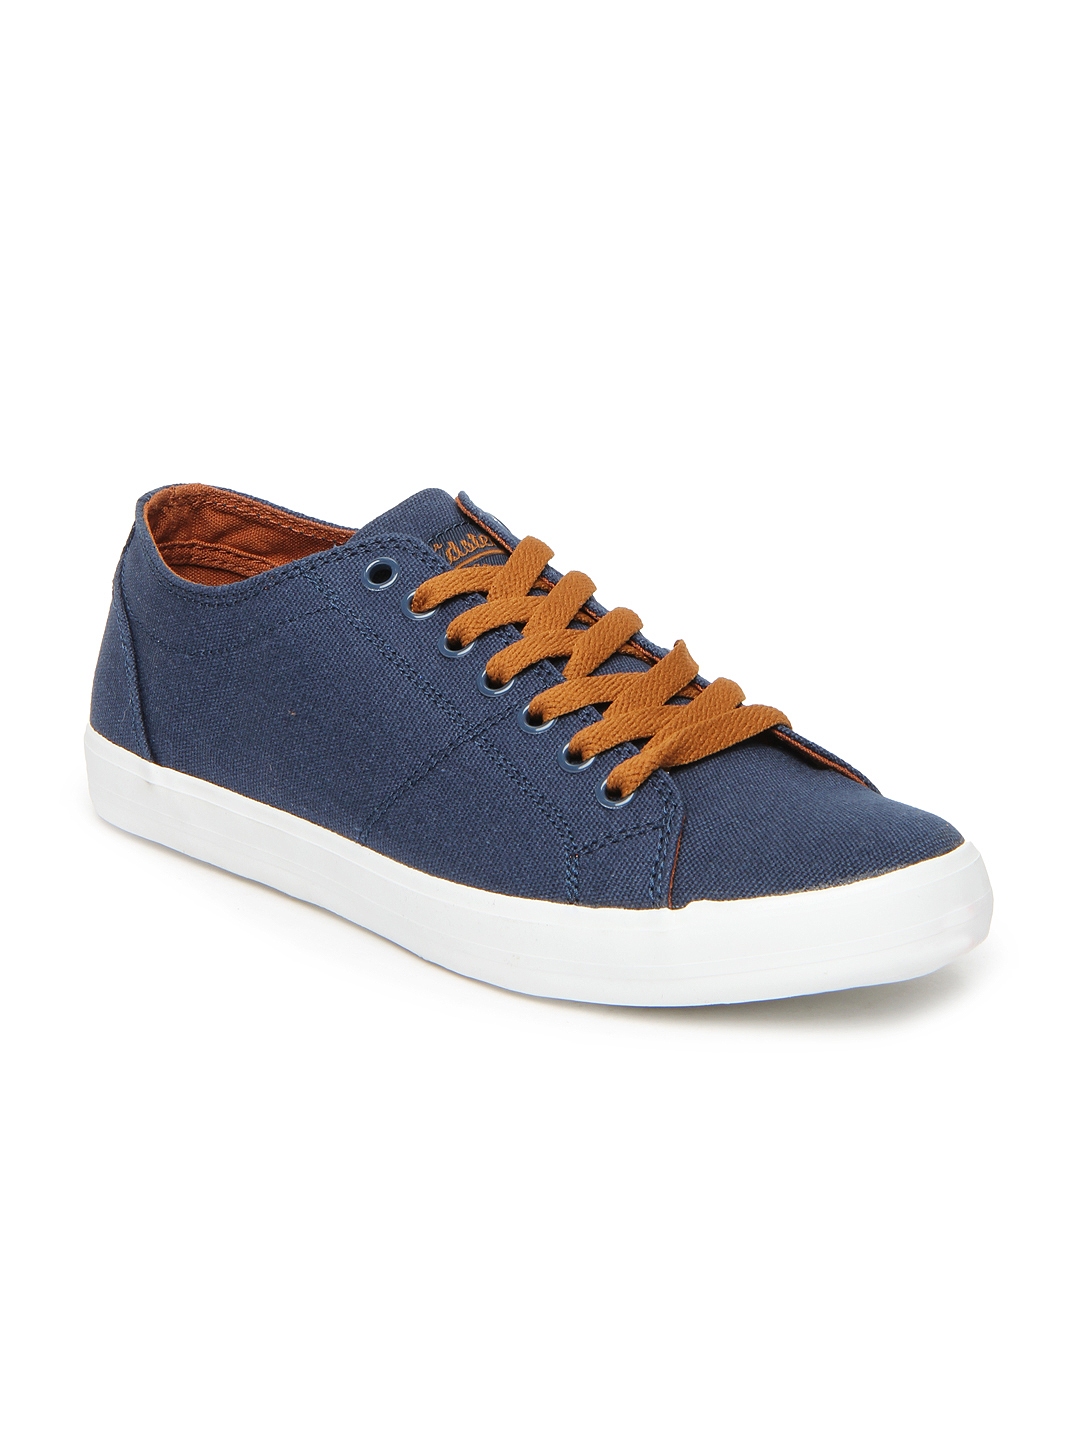 Buy Roadster Men Navy Casual Shoes - Casual Shoes for Men 288619 | Myntra